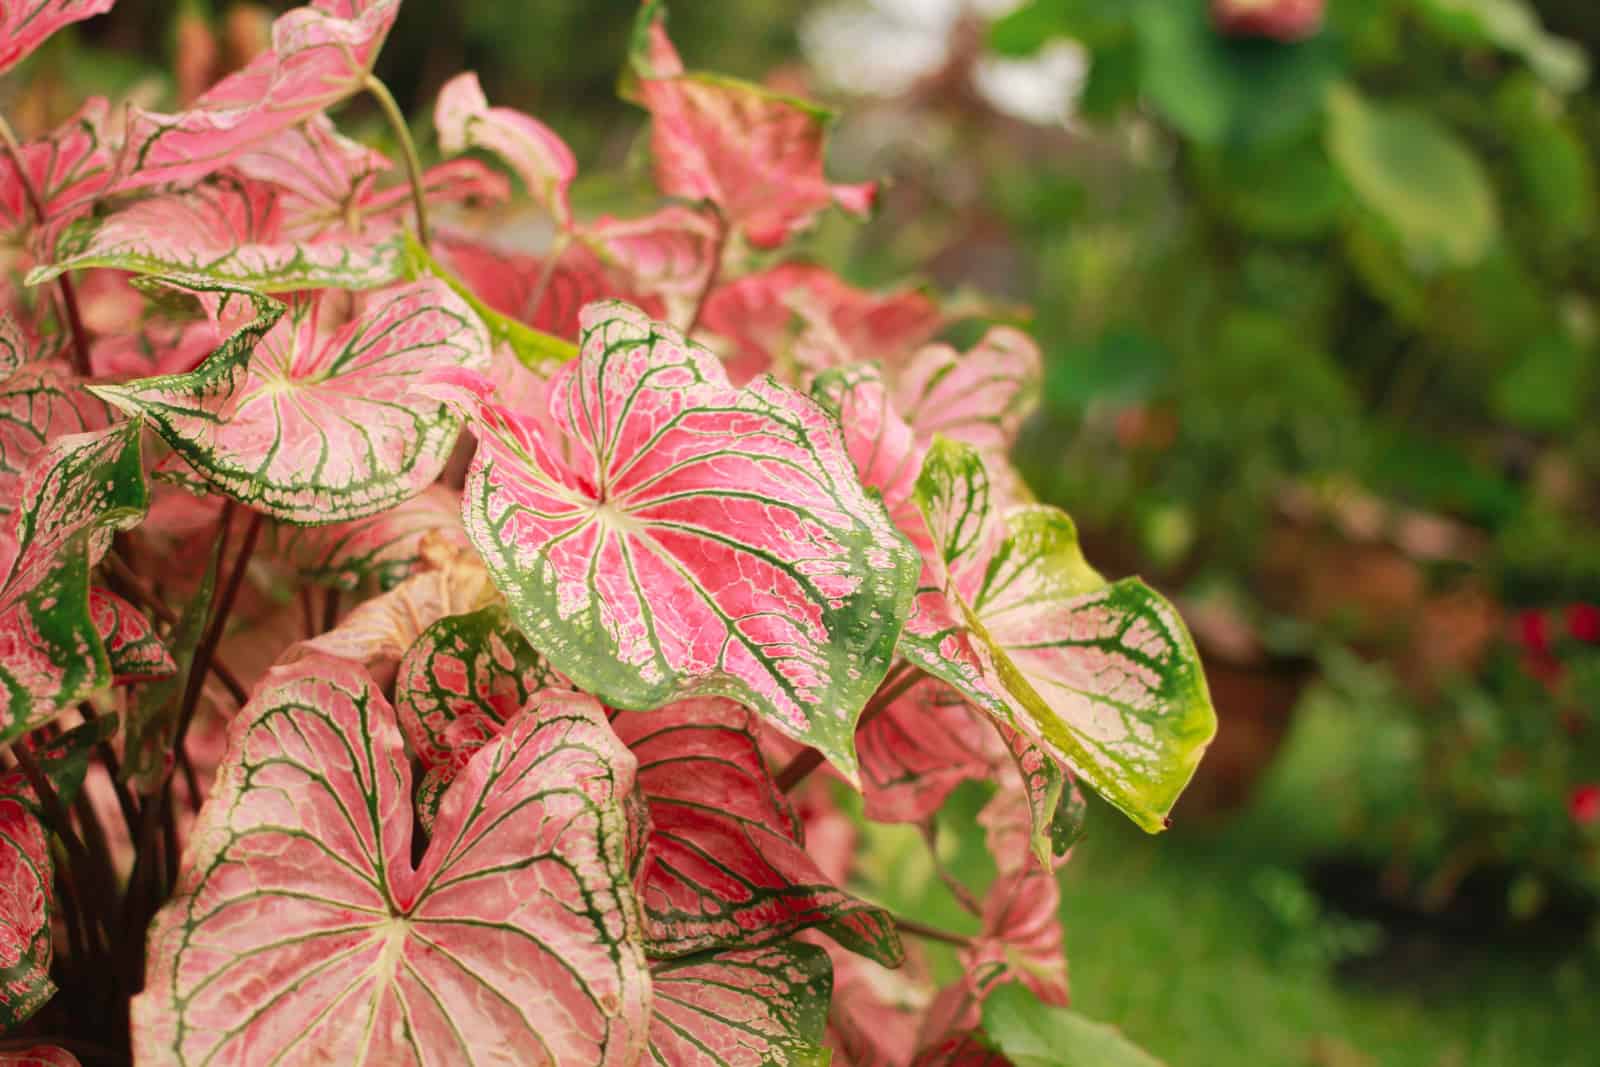 Caladium bicolor, beautifully patterned pink leaves used in the garden.